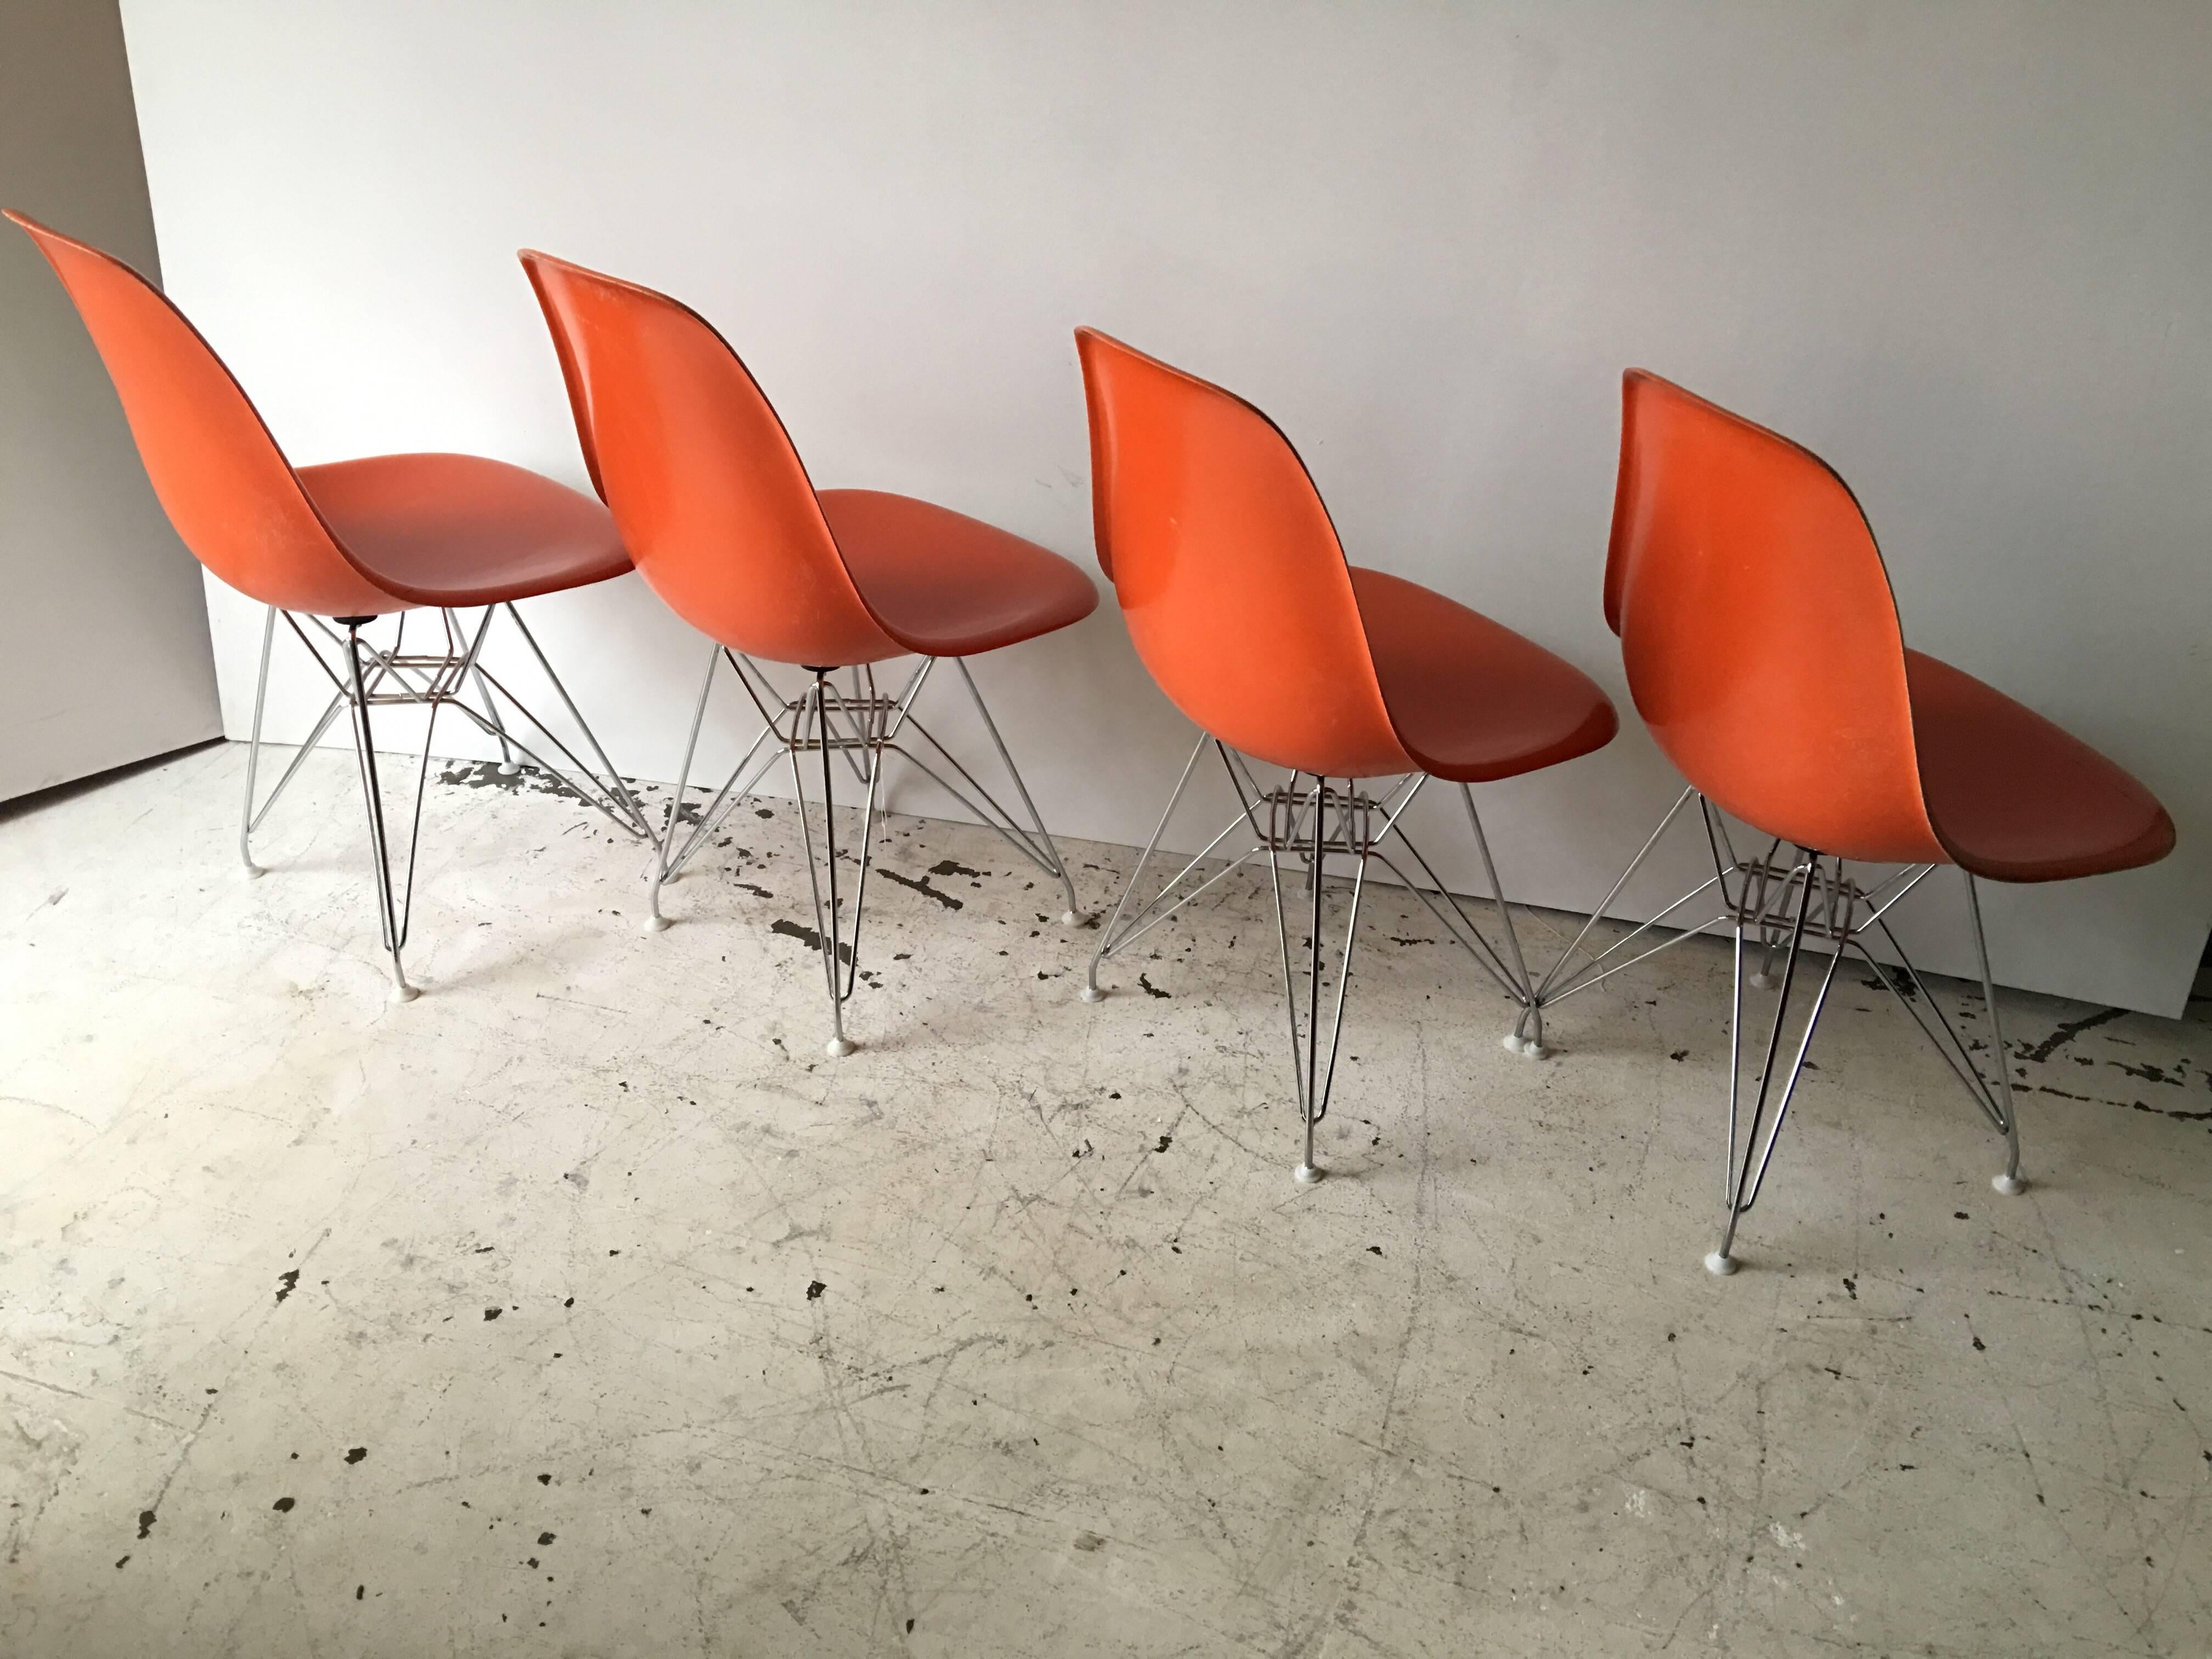 This is a nice set of vintage 1977 bright orange Eames, Herman Miller fiber glass chairs, on new production Chrome Eiffel Tower bases. Chairs fully marked with Herman Miller Cincinatti Milicron logo, in Great shape, few scratches as pictured.